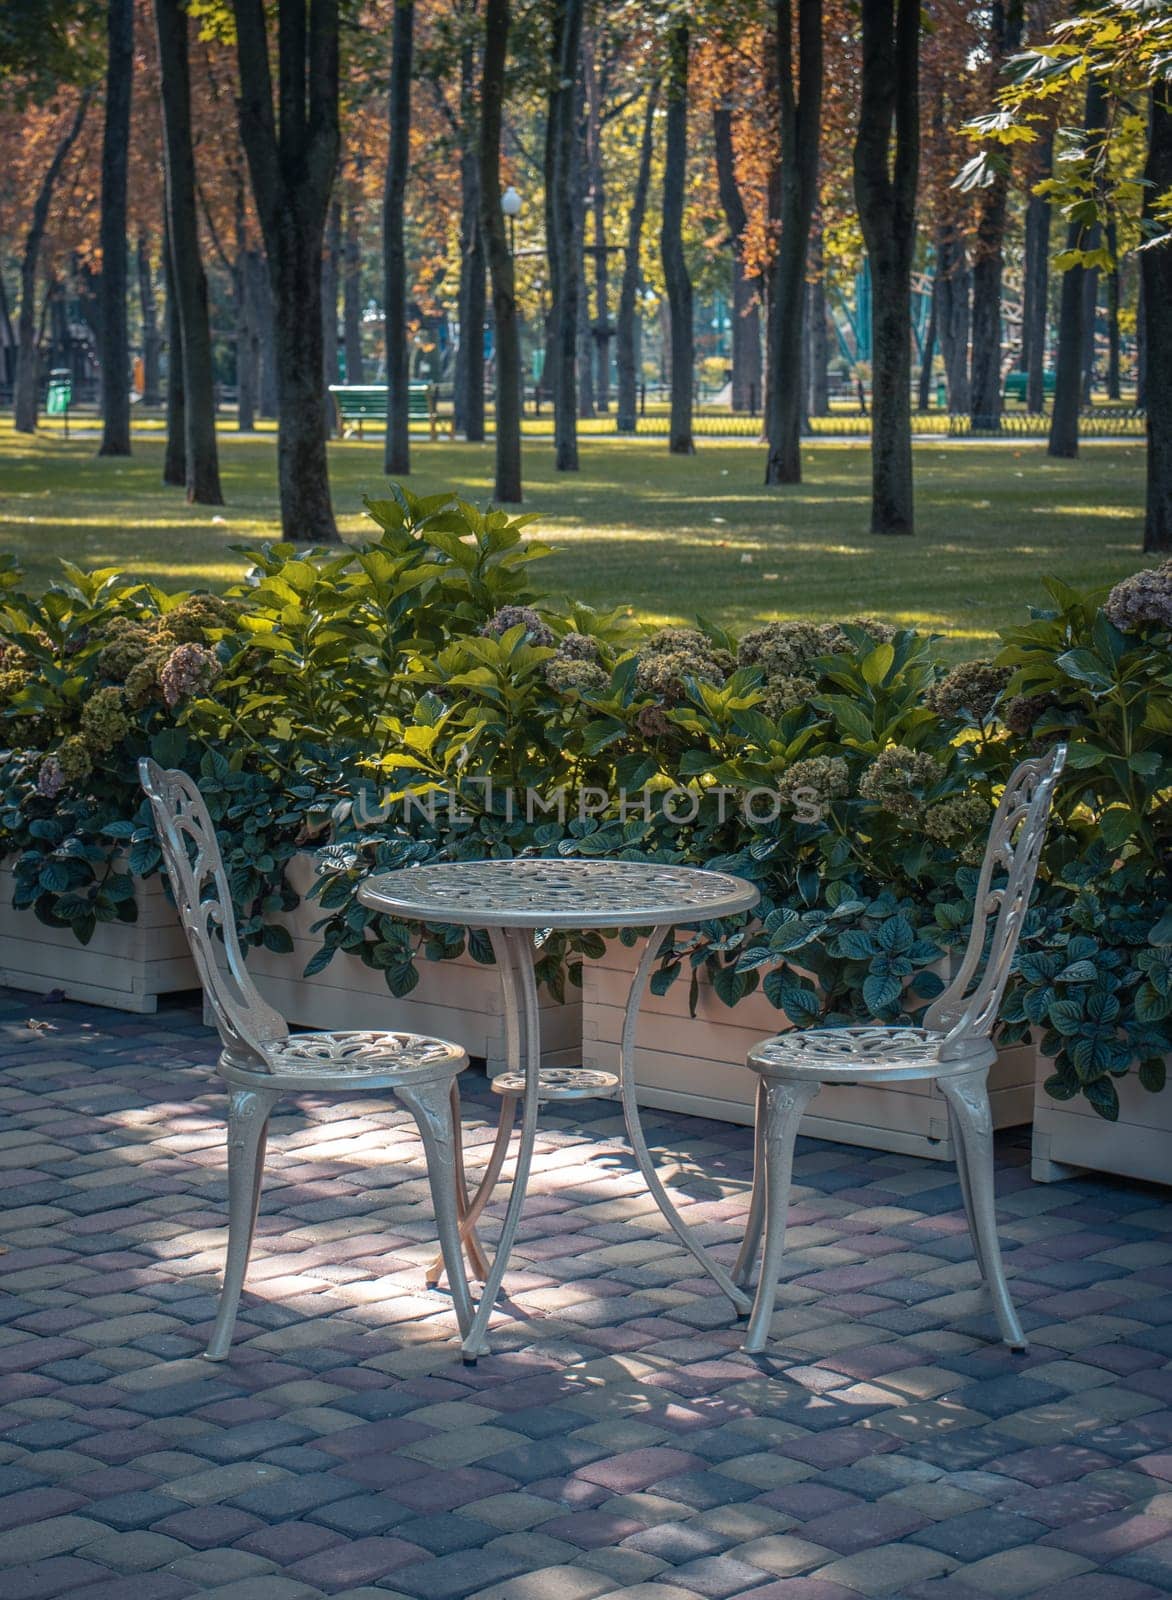 Cafe tables and benches without visitors concept photo. Quiet autumn atmosphere. Autumnal park, fall season, natural background. Idyllic scene. High quality picture for wallpaper, travel blog, magazine, article